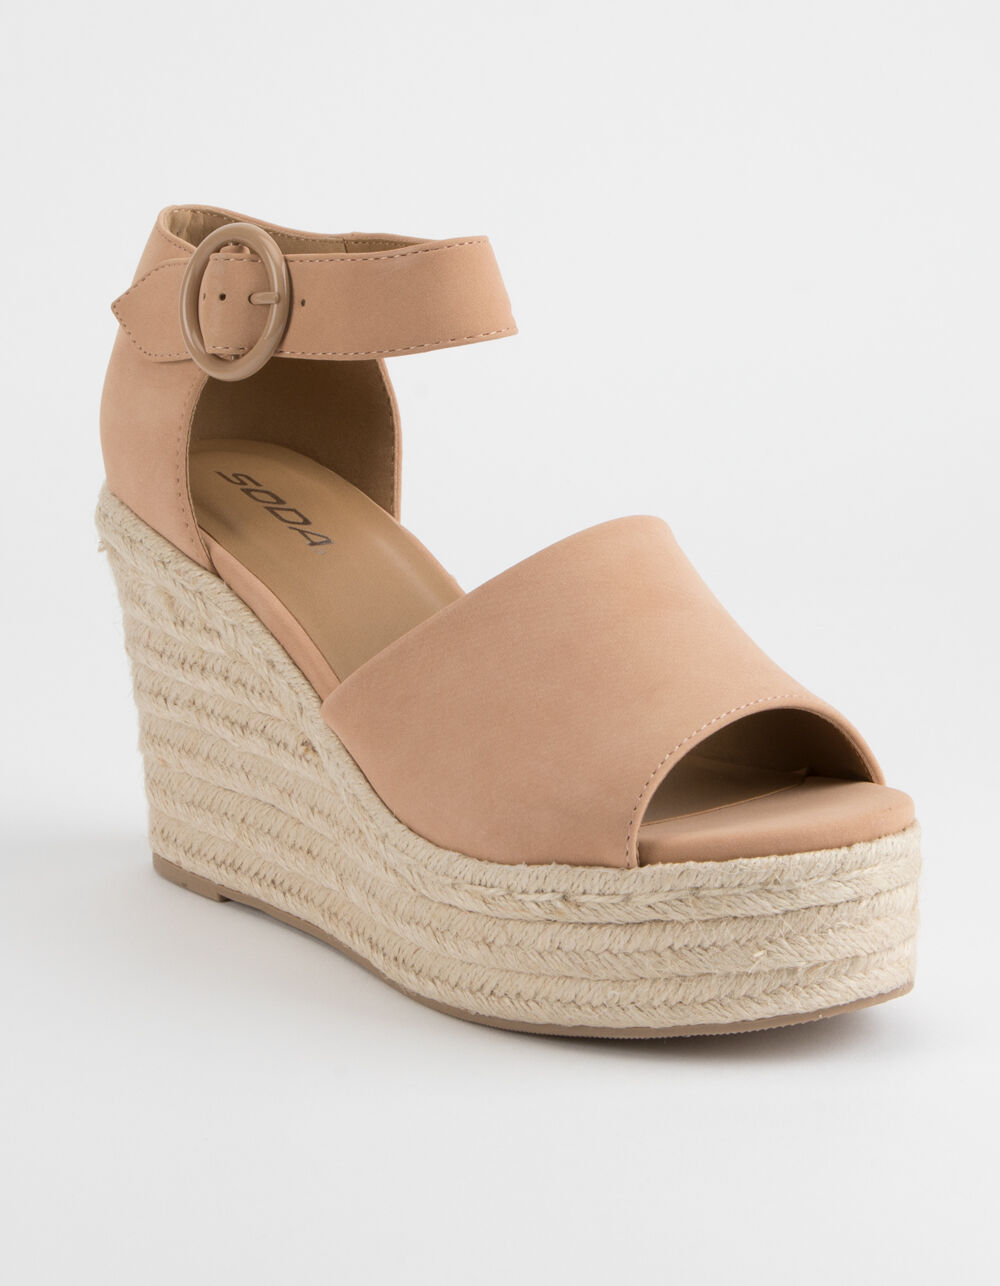 SODA Ankle Strap Nude Womens Espadrille Wedges - NUDE | Tillys